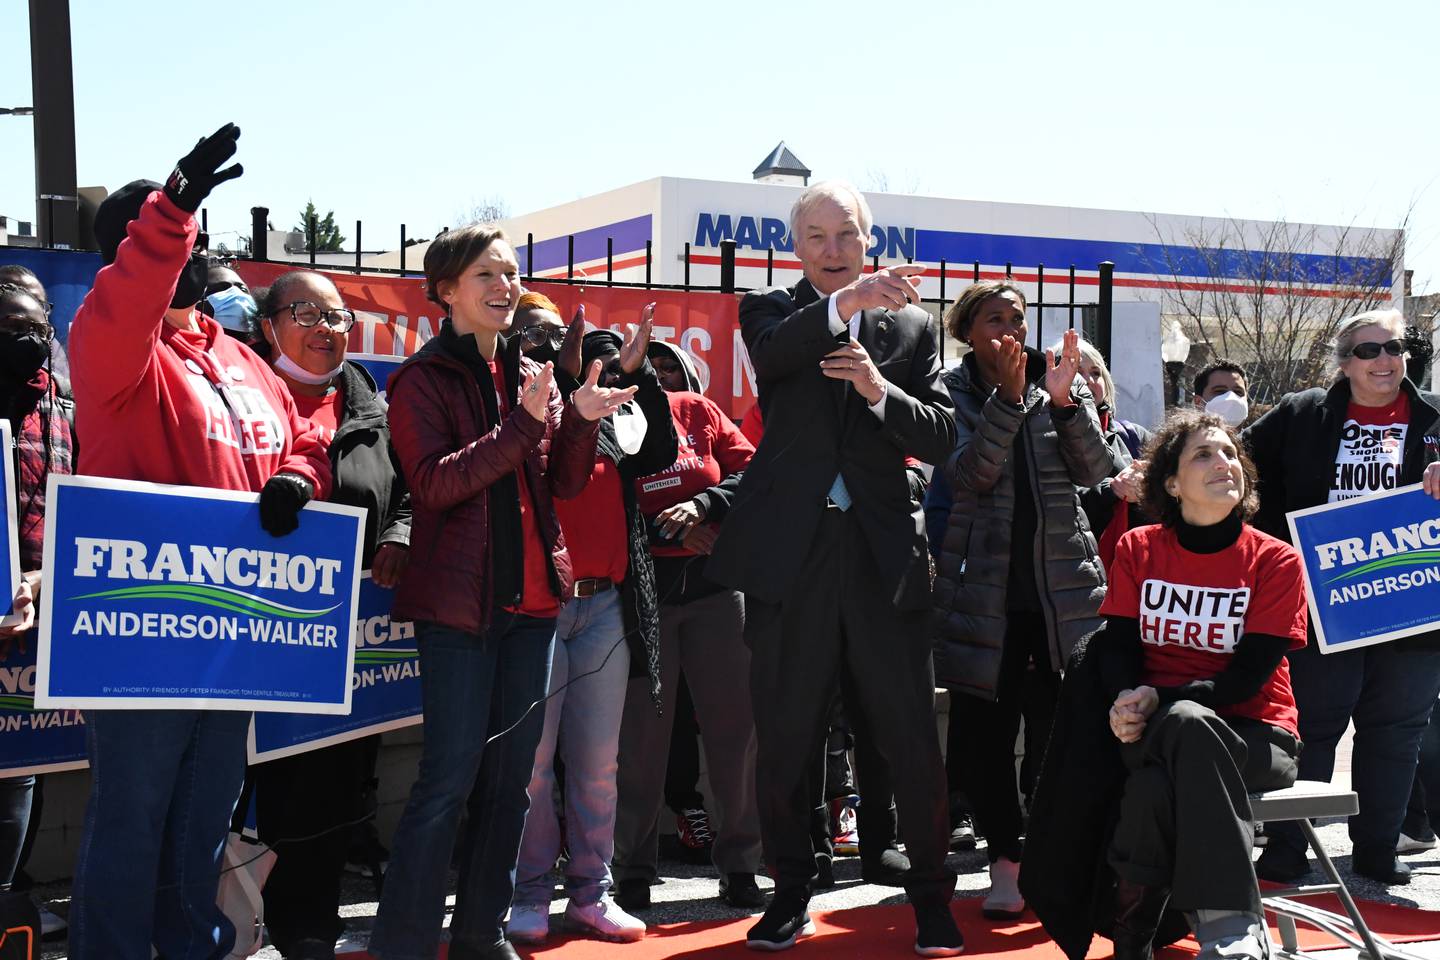 Photo by Pamela Wood/The Baltimore Banner -- Maryland gubernatorial candidate Peter Franchot rallies with members of the Unite Here! union in Baltimore's Station North neighborhood before a door-knocking campaign on April 2, 2022.